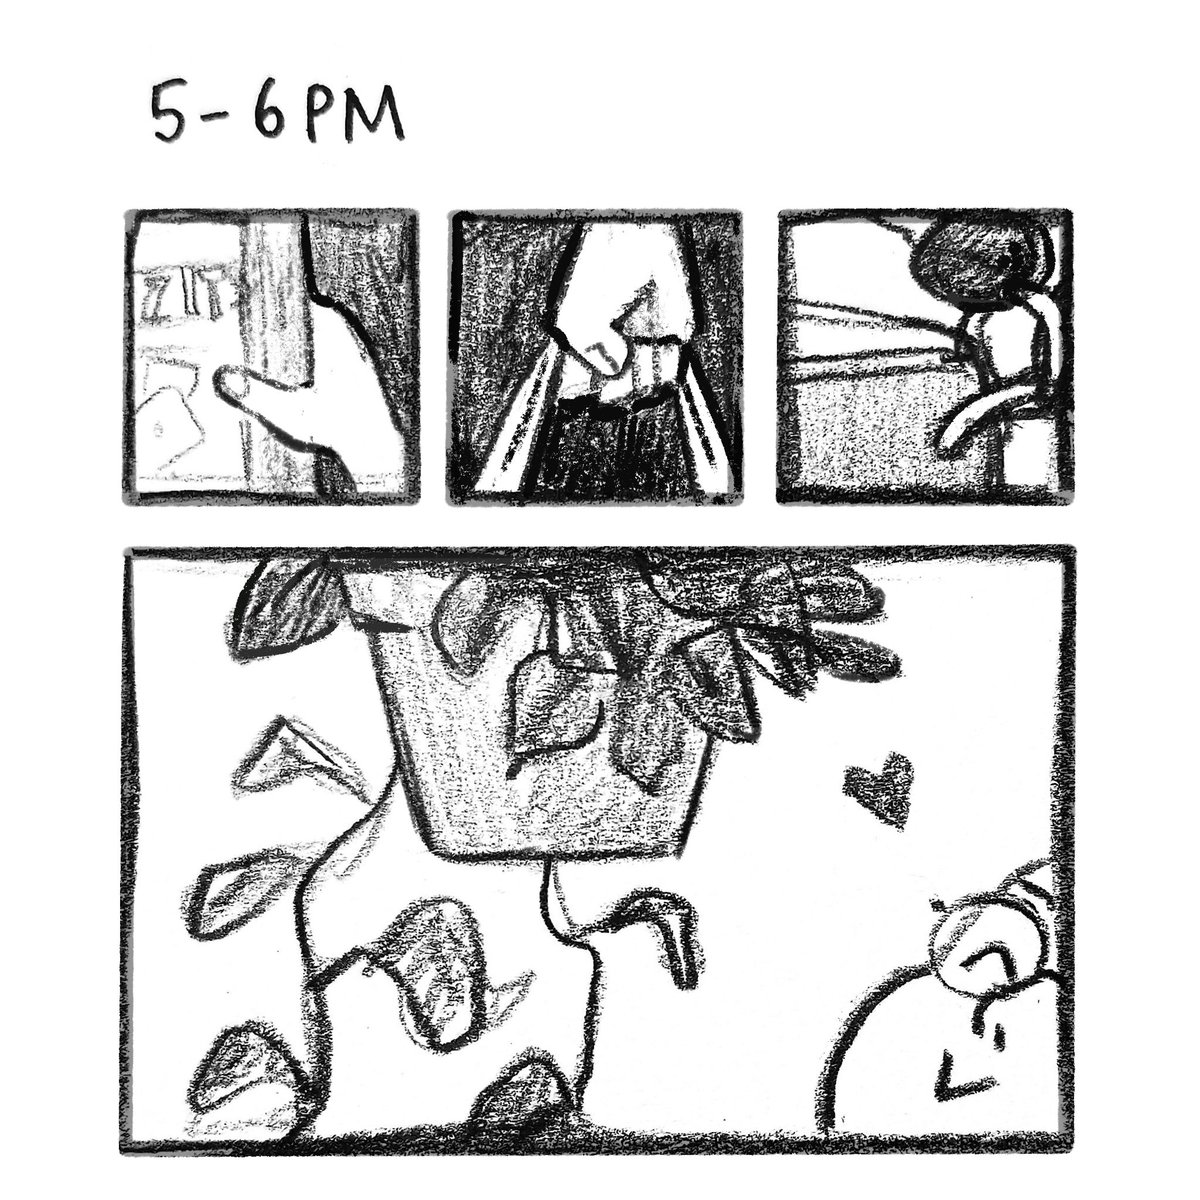 #hourlycomicday 5-6PM: Ralphs trip with chrispy, got a pothos for $7.99!! 